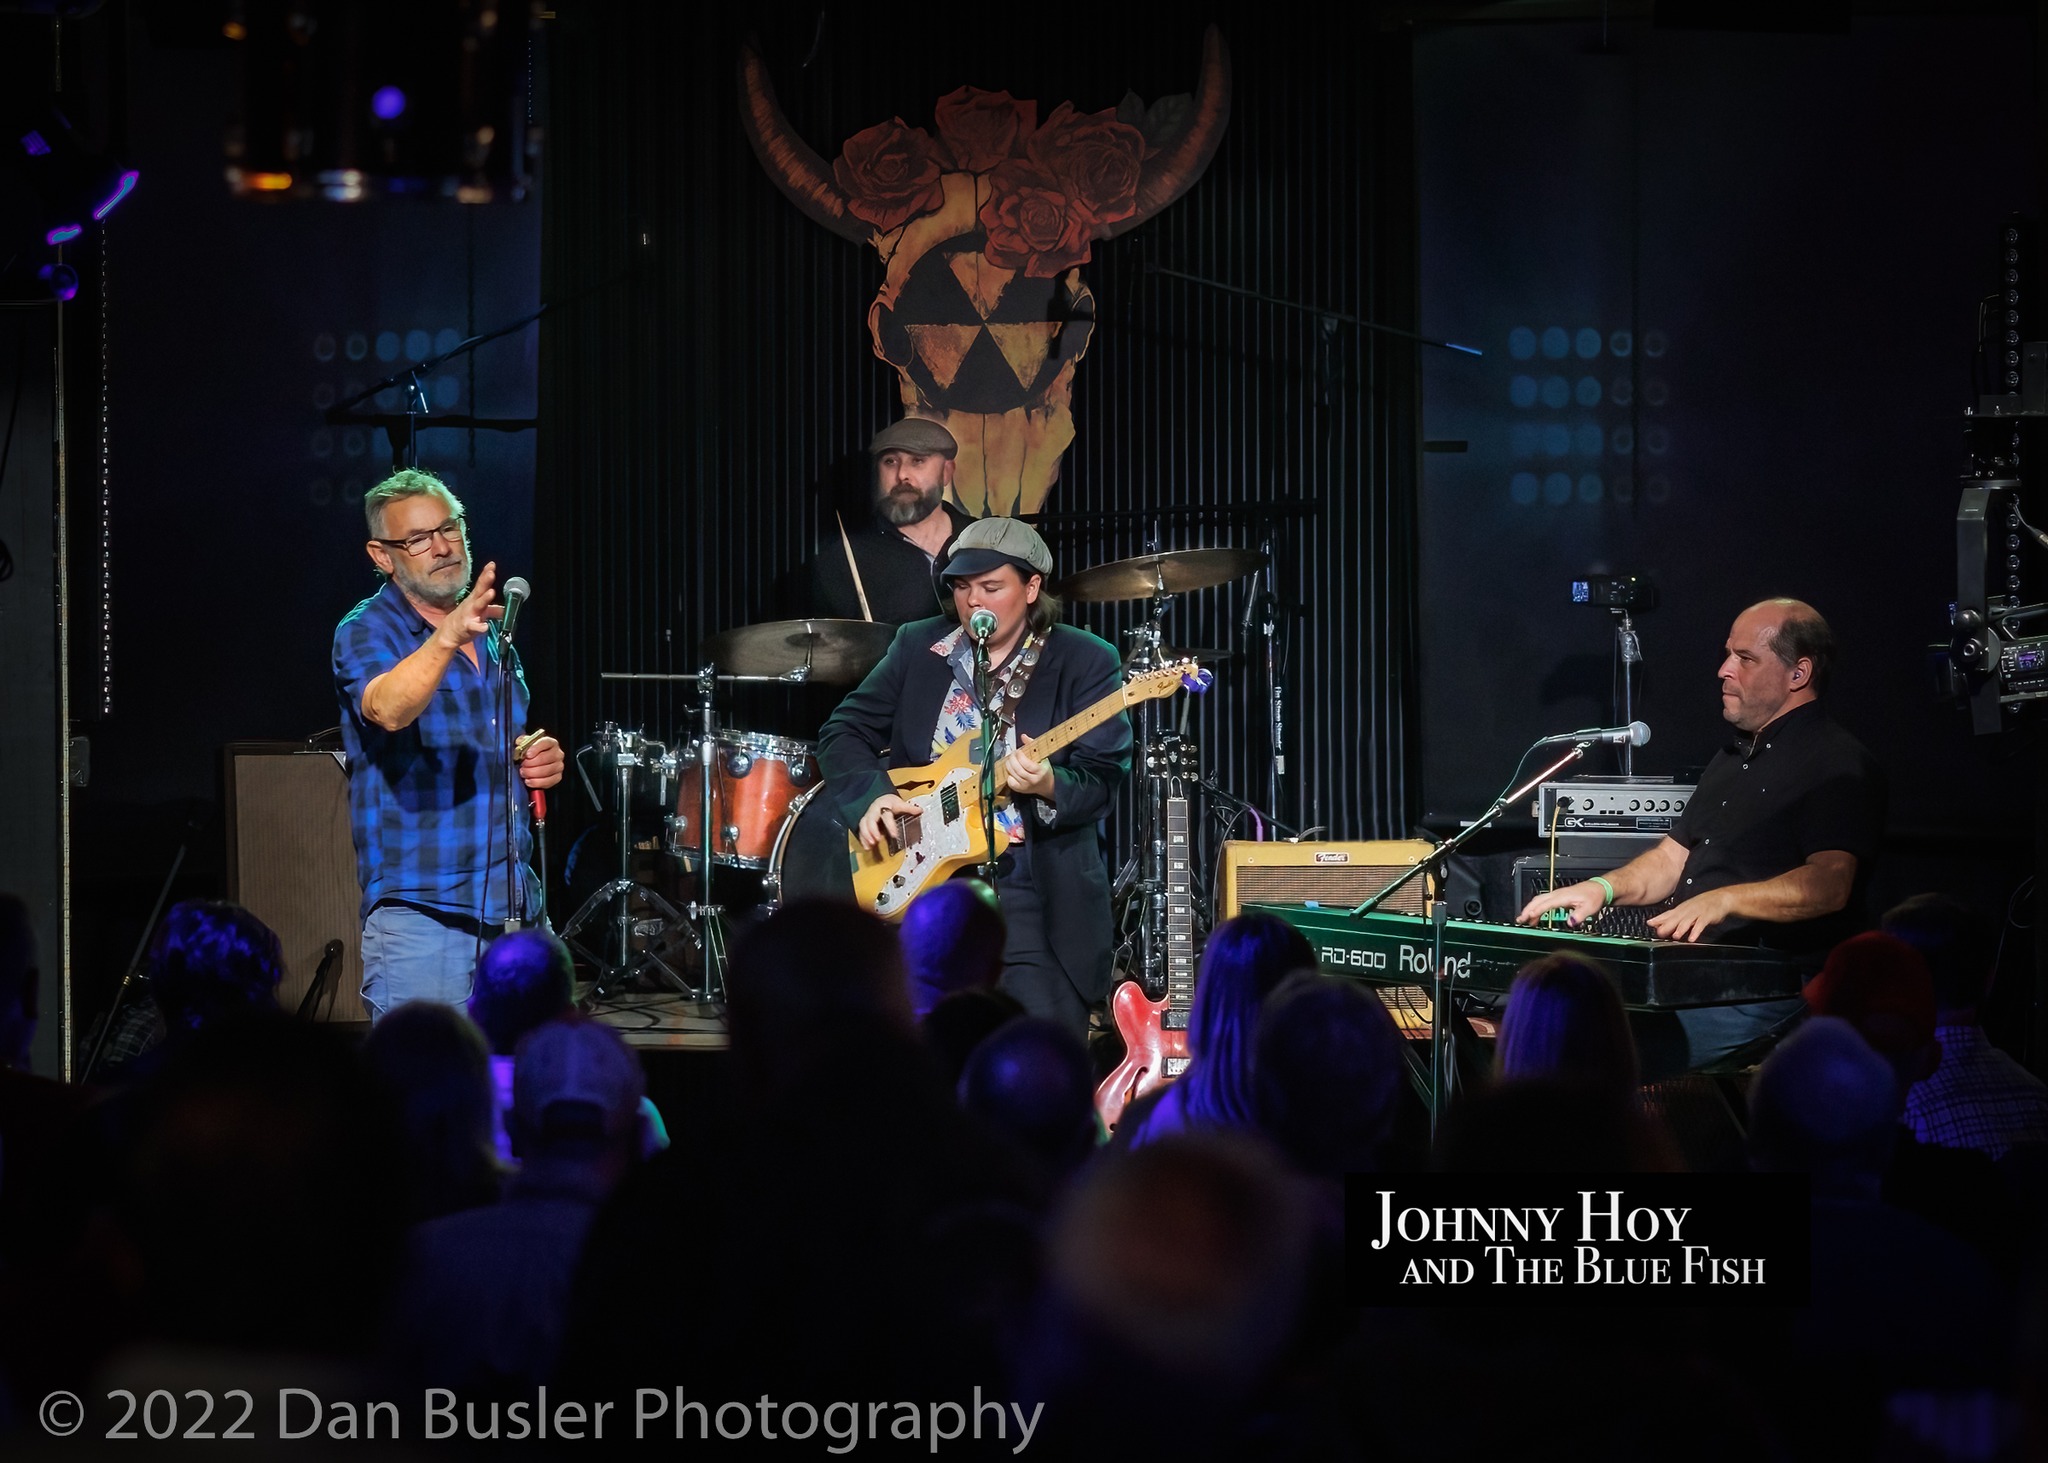 ConcertSeries – Johnny Hoy and the Bluefish – by Dan Busler – 2